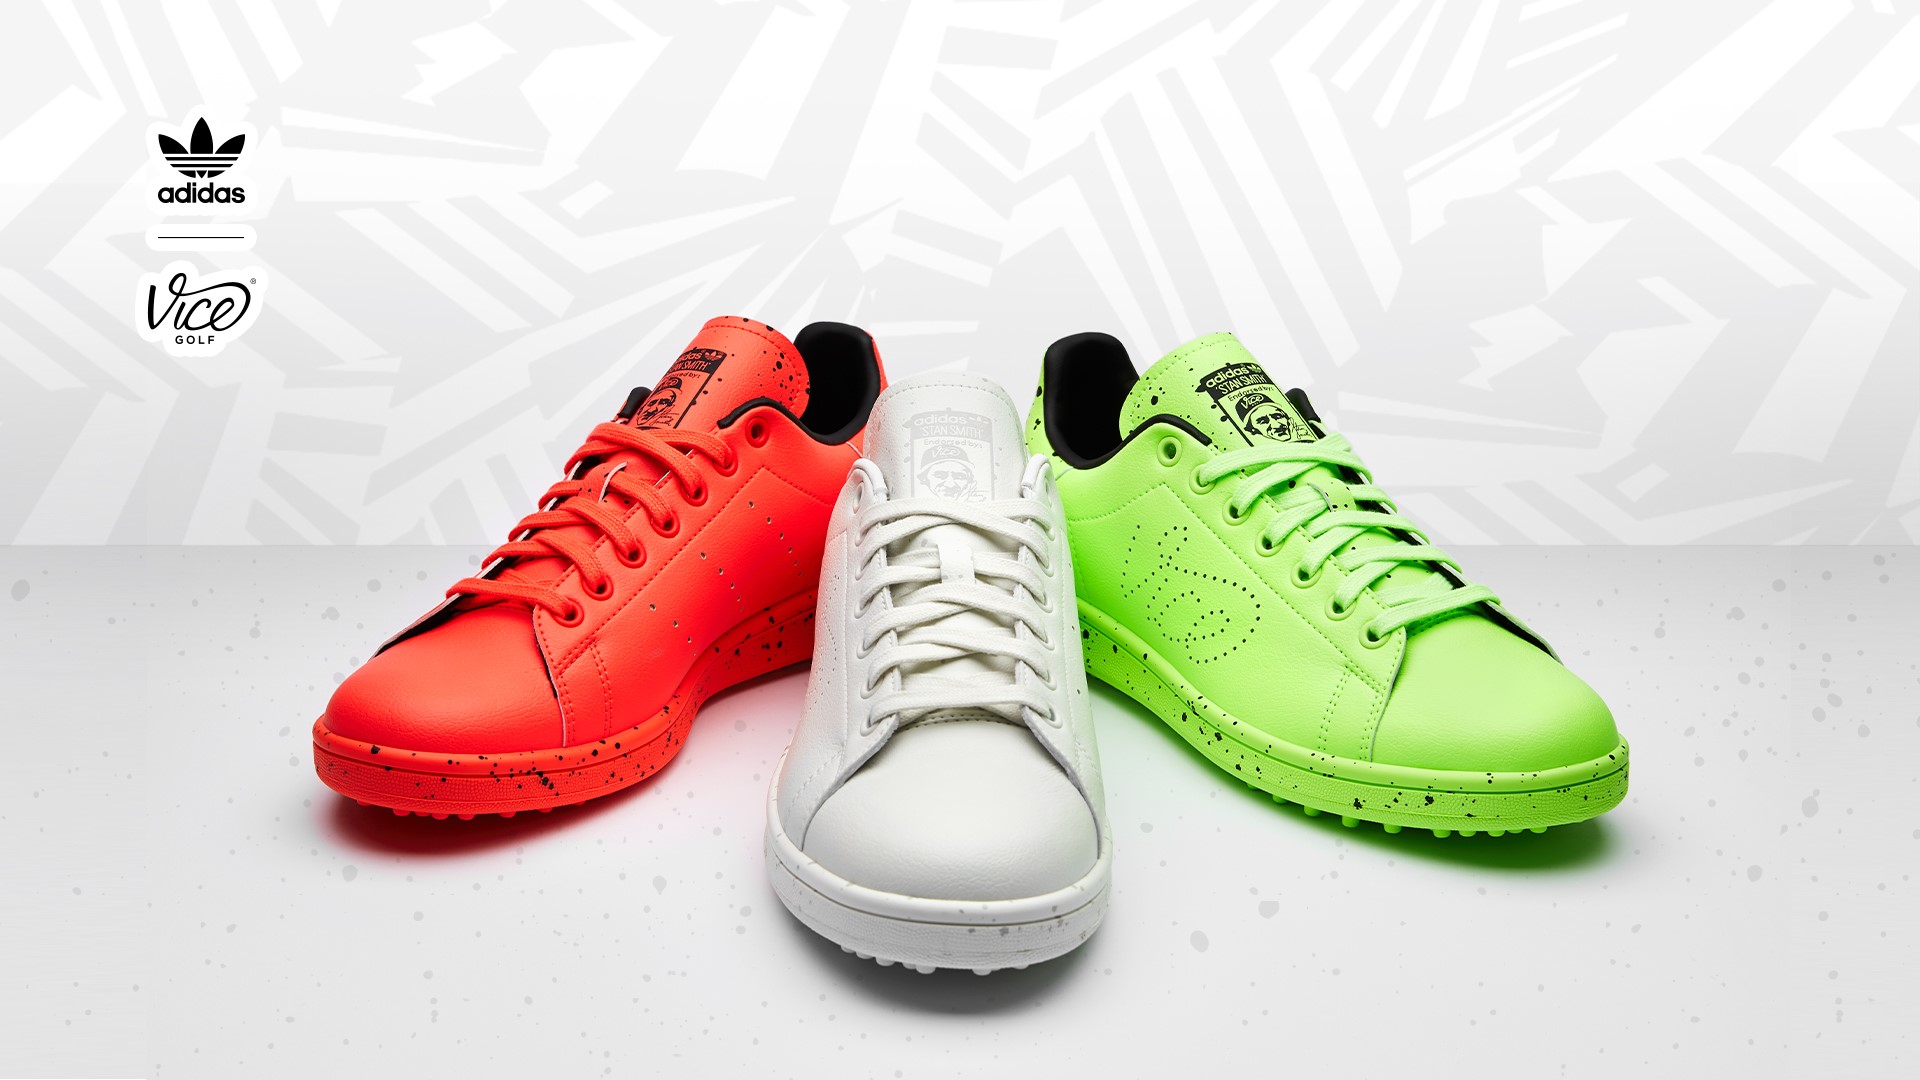 todo lo mejor interfaz eficientemente Limited Edition Stan Smith x Vice Golf Brings Bold Style to Iconic Footwear